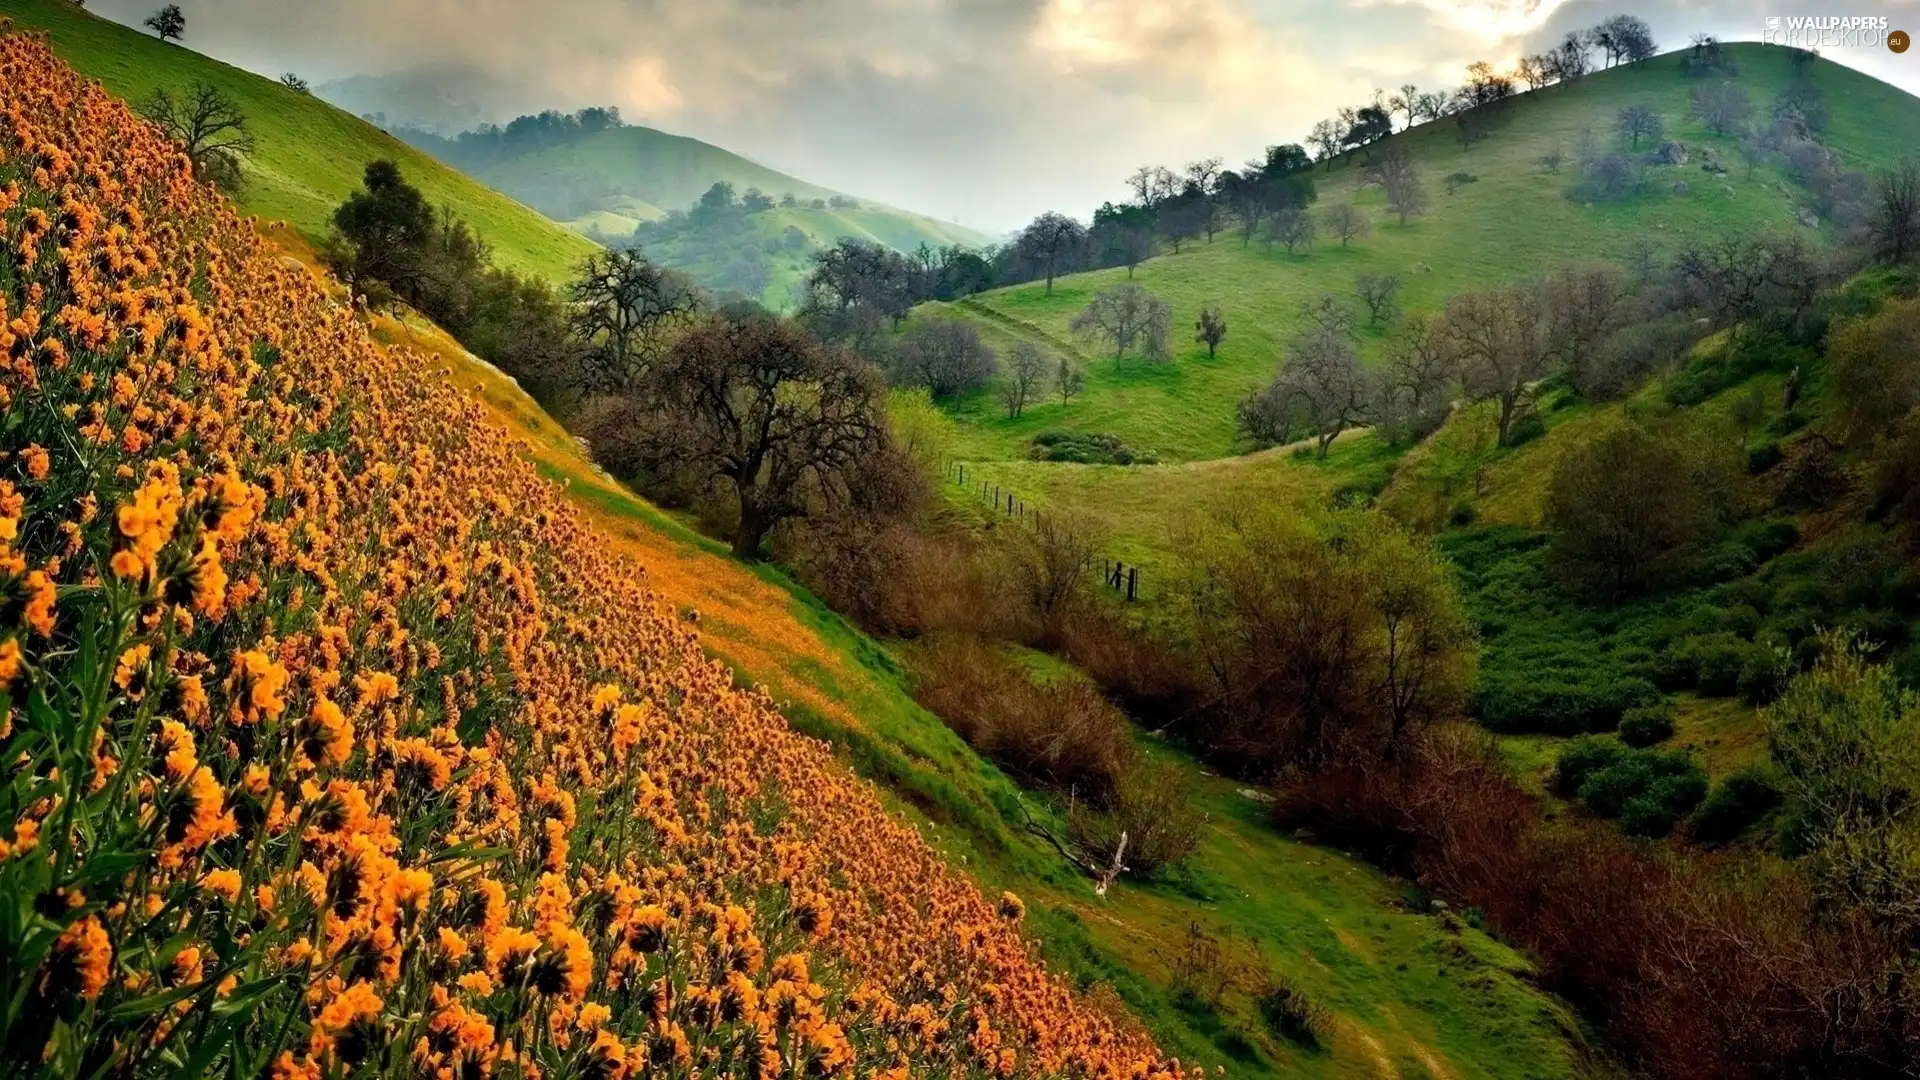 Mountains, Yellow, Flowers, Meadow